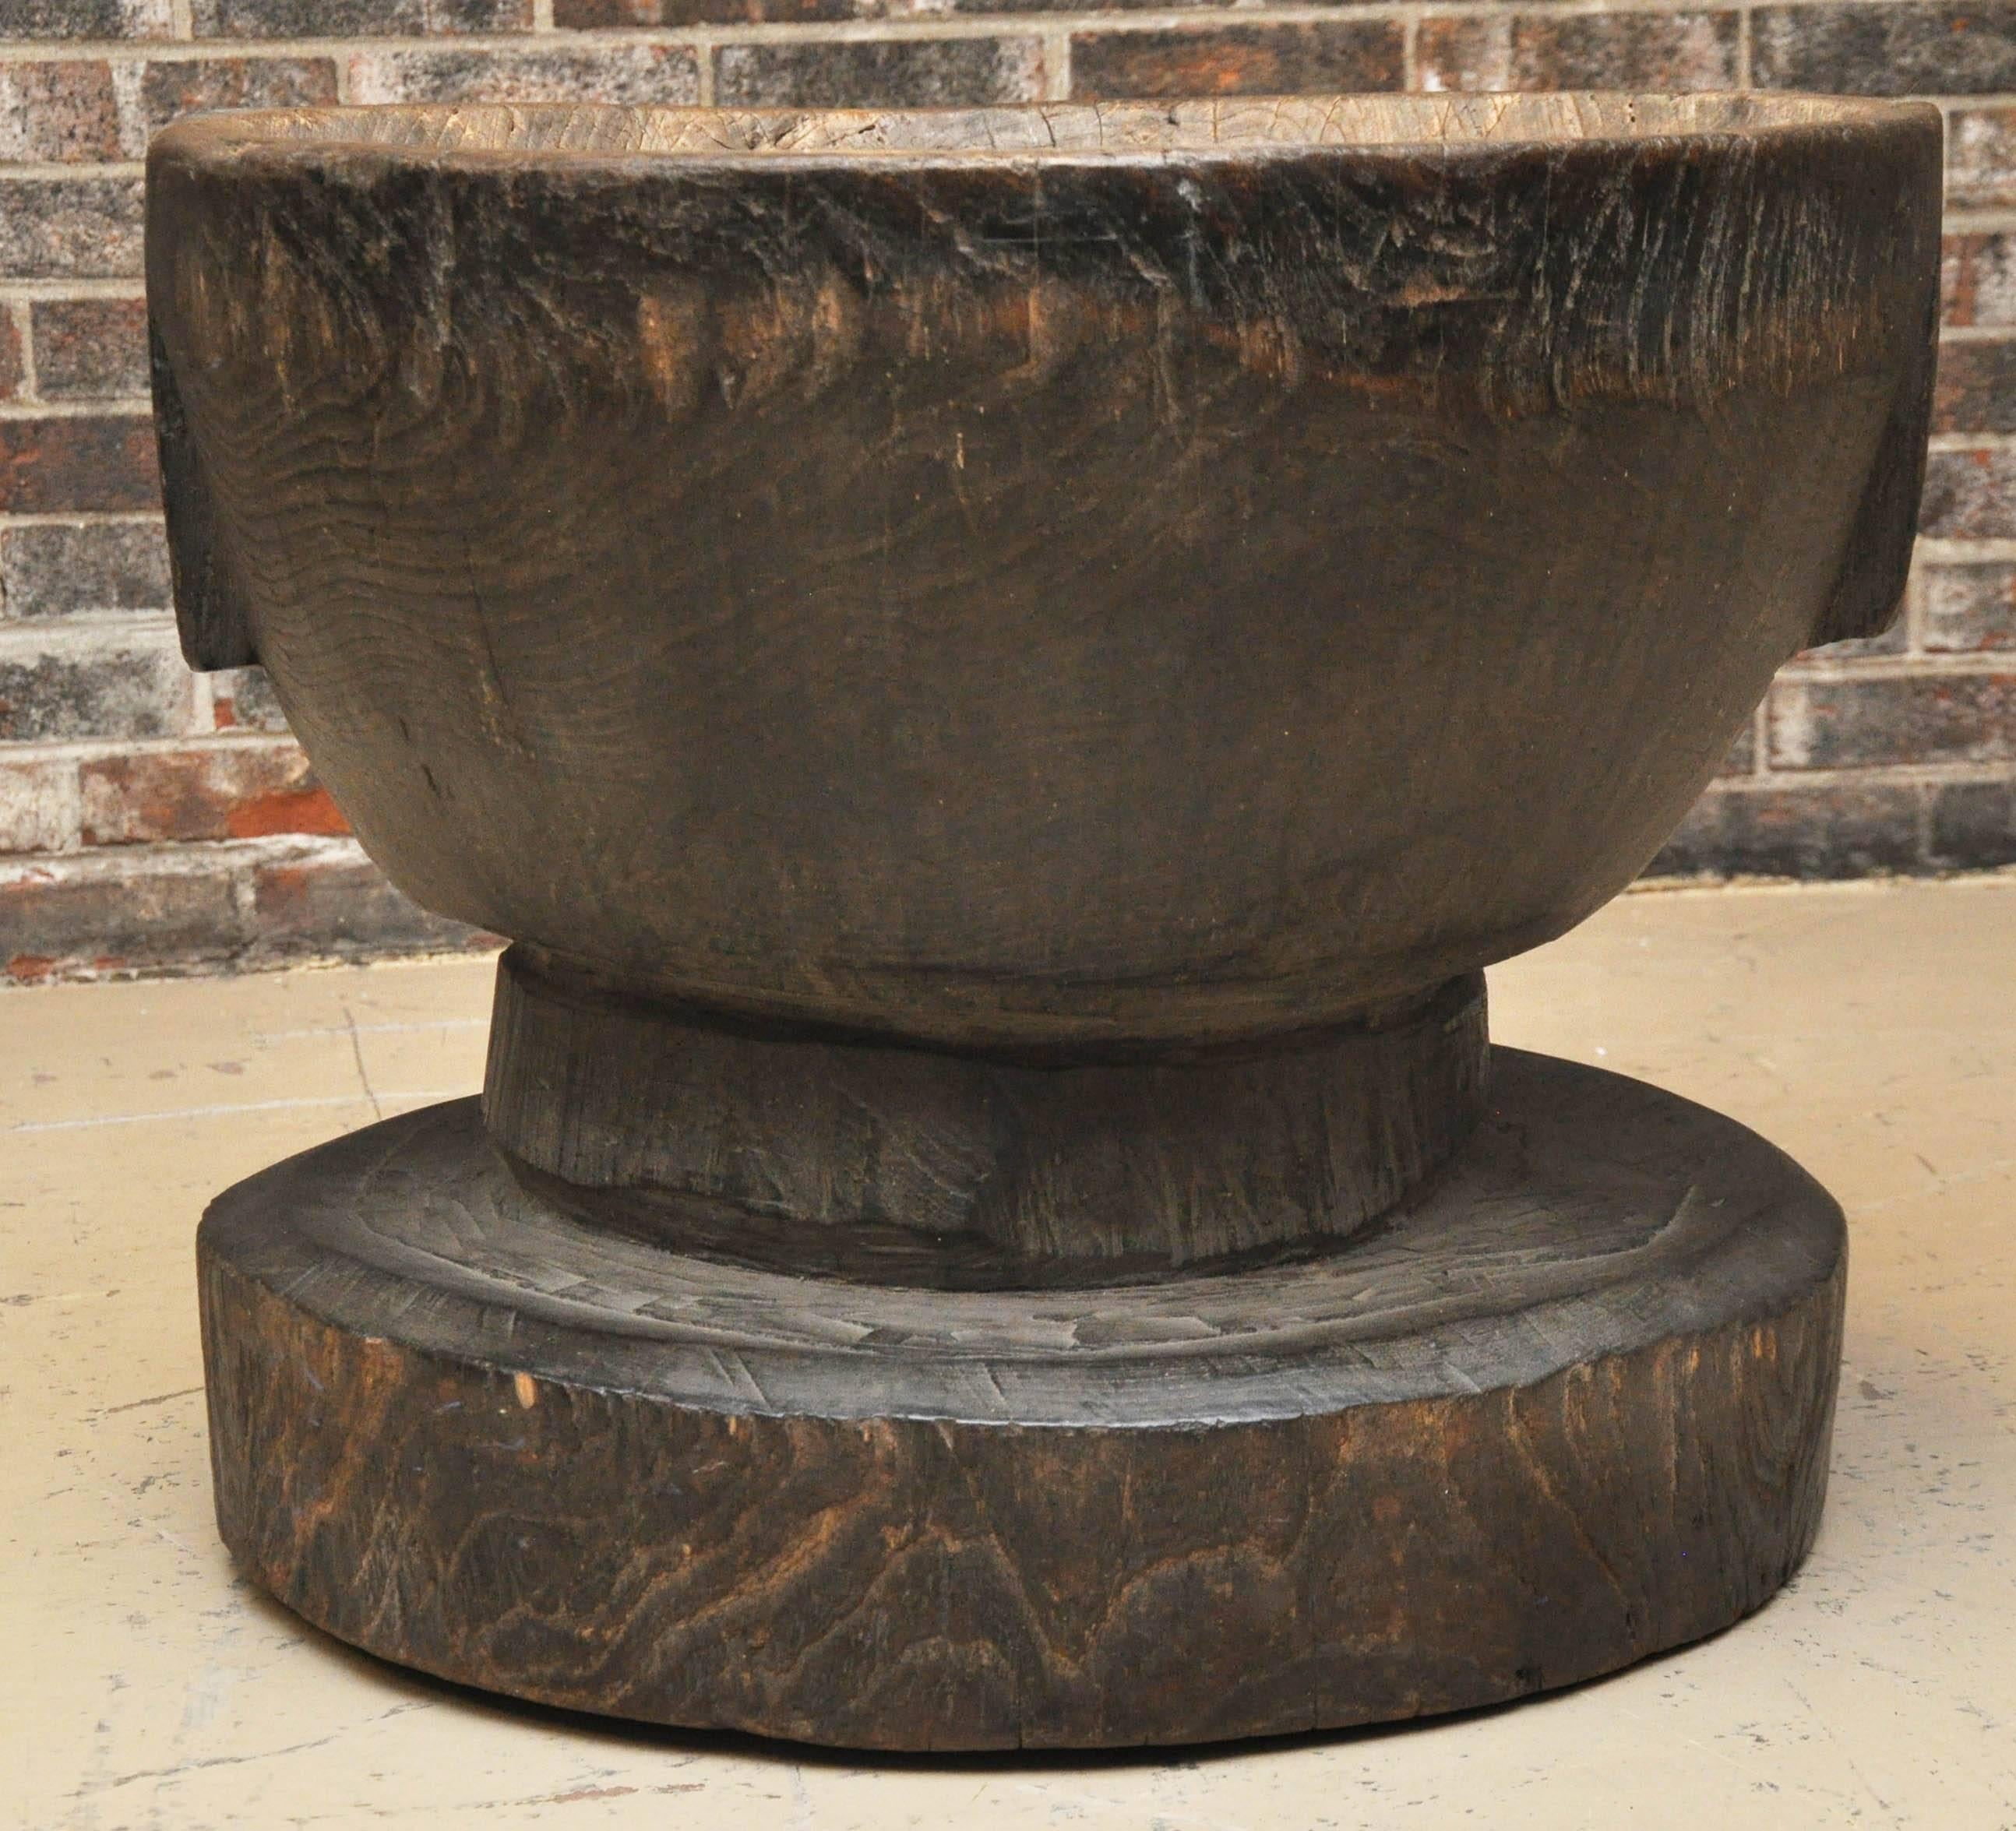 Late 19th or early 20th century large Japanese Usu (wood mortar), from Meiji era. From the Tohoku region of Japan. Made of Keyaki wood.

Dimensions: 27